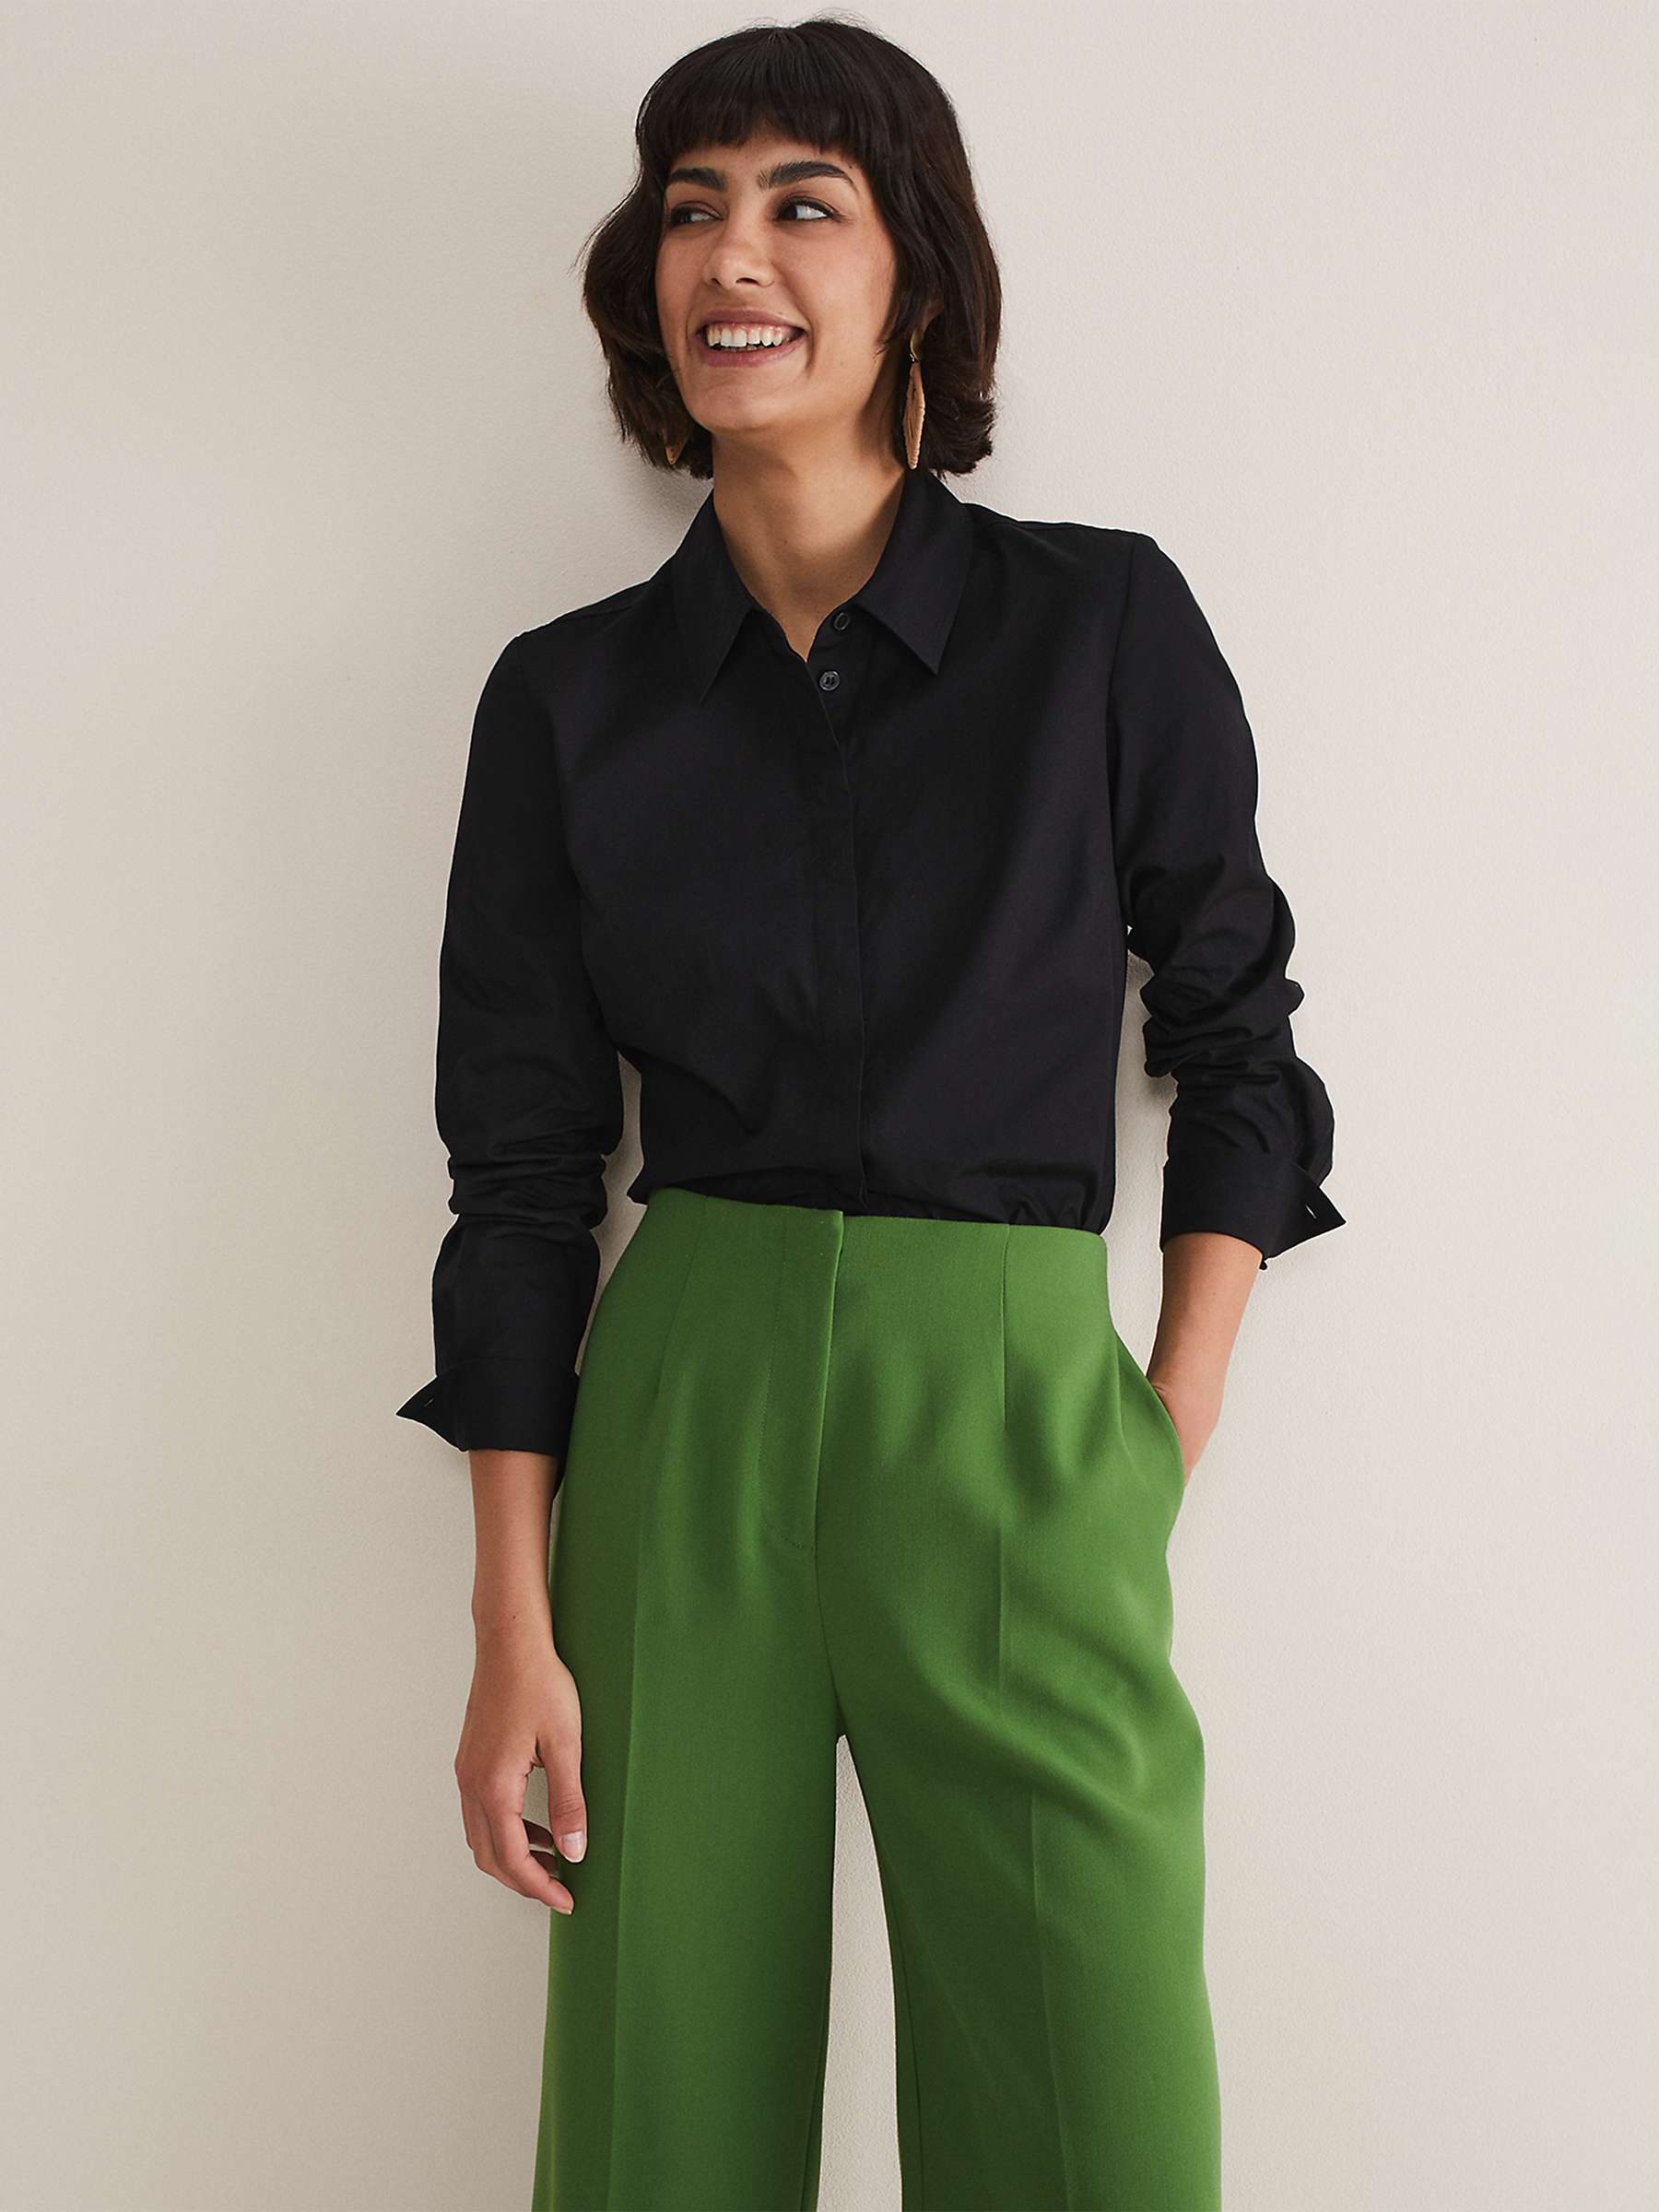 Buy Phase Eight Classic Fitted Shirt, Black Online at johnlewis.com